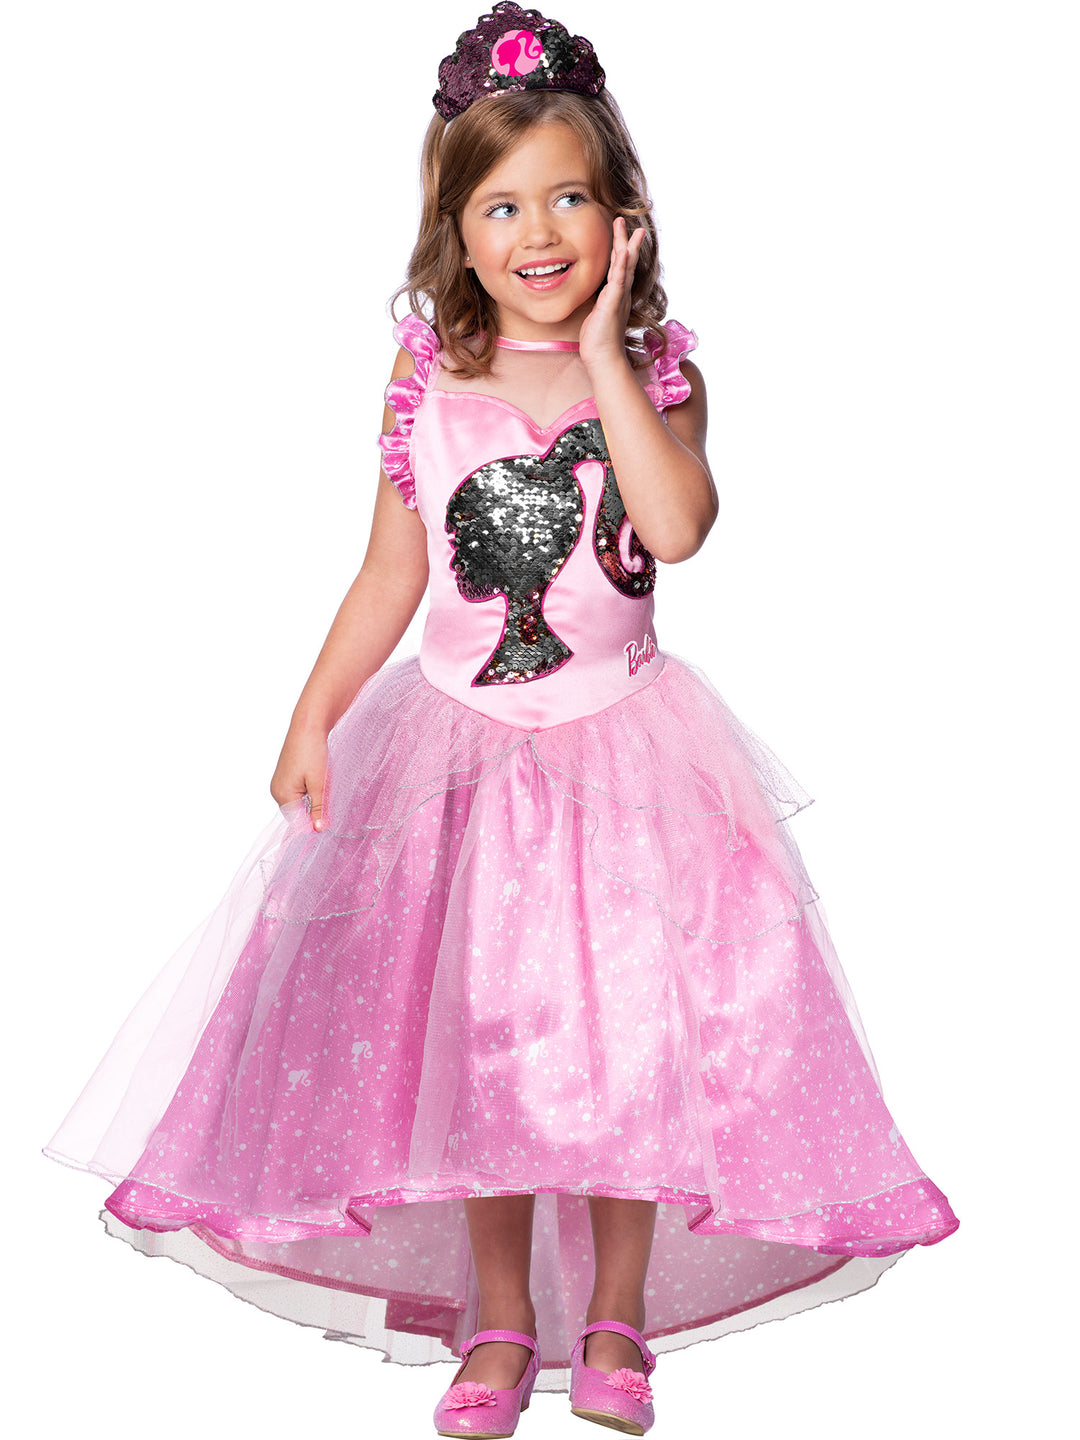 Officially Licensed Barbie Princess Fantasy Costume